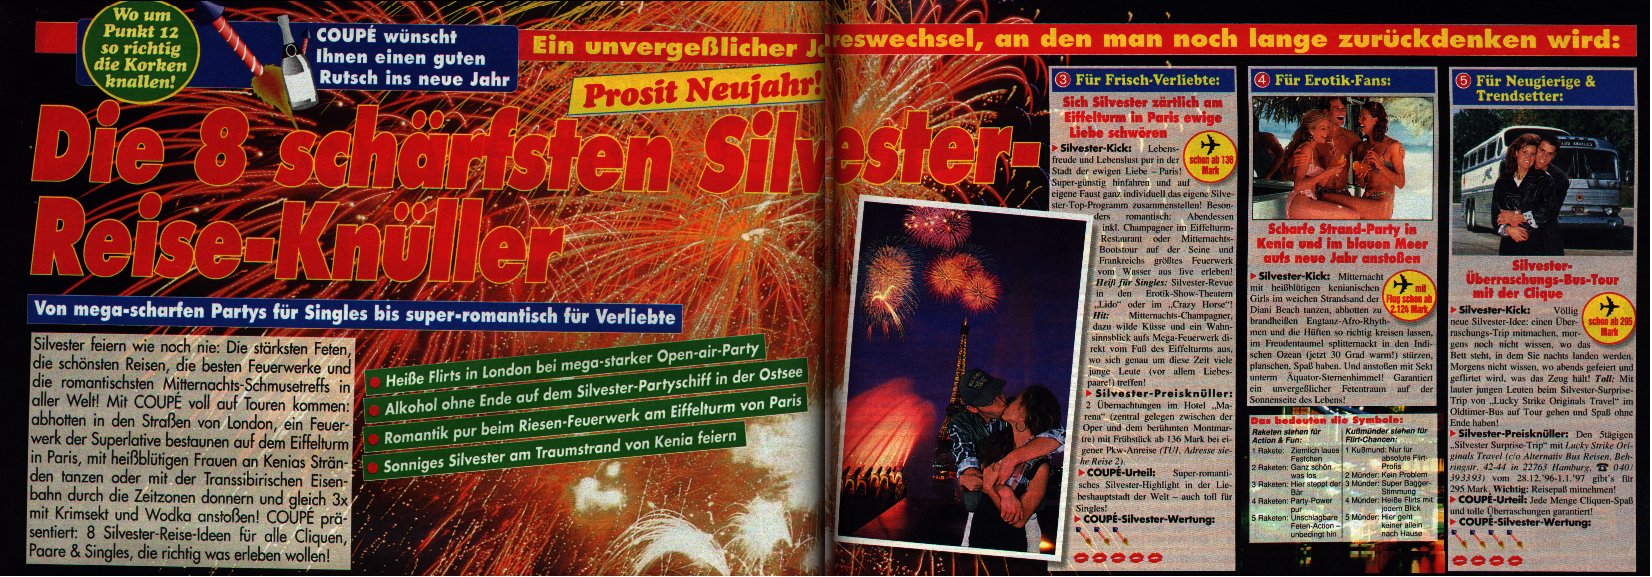 COUP vom 1.12.96